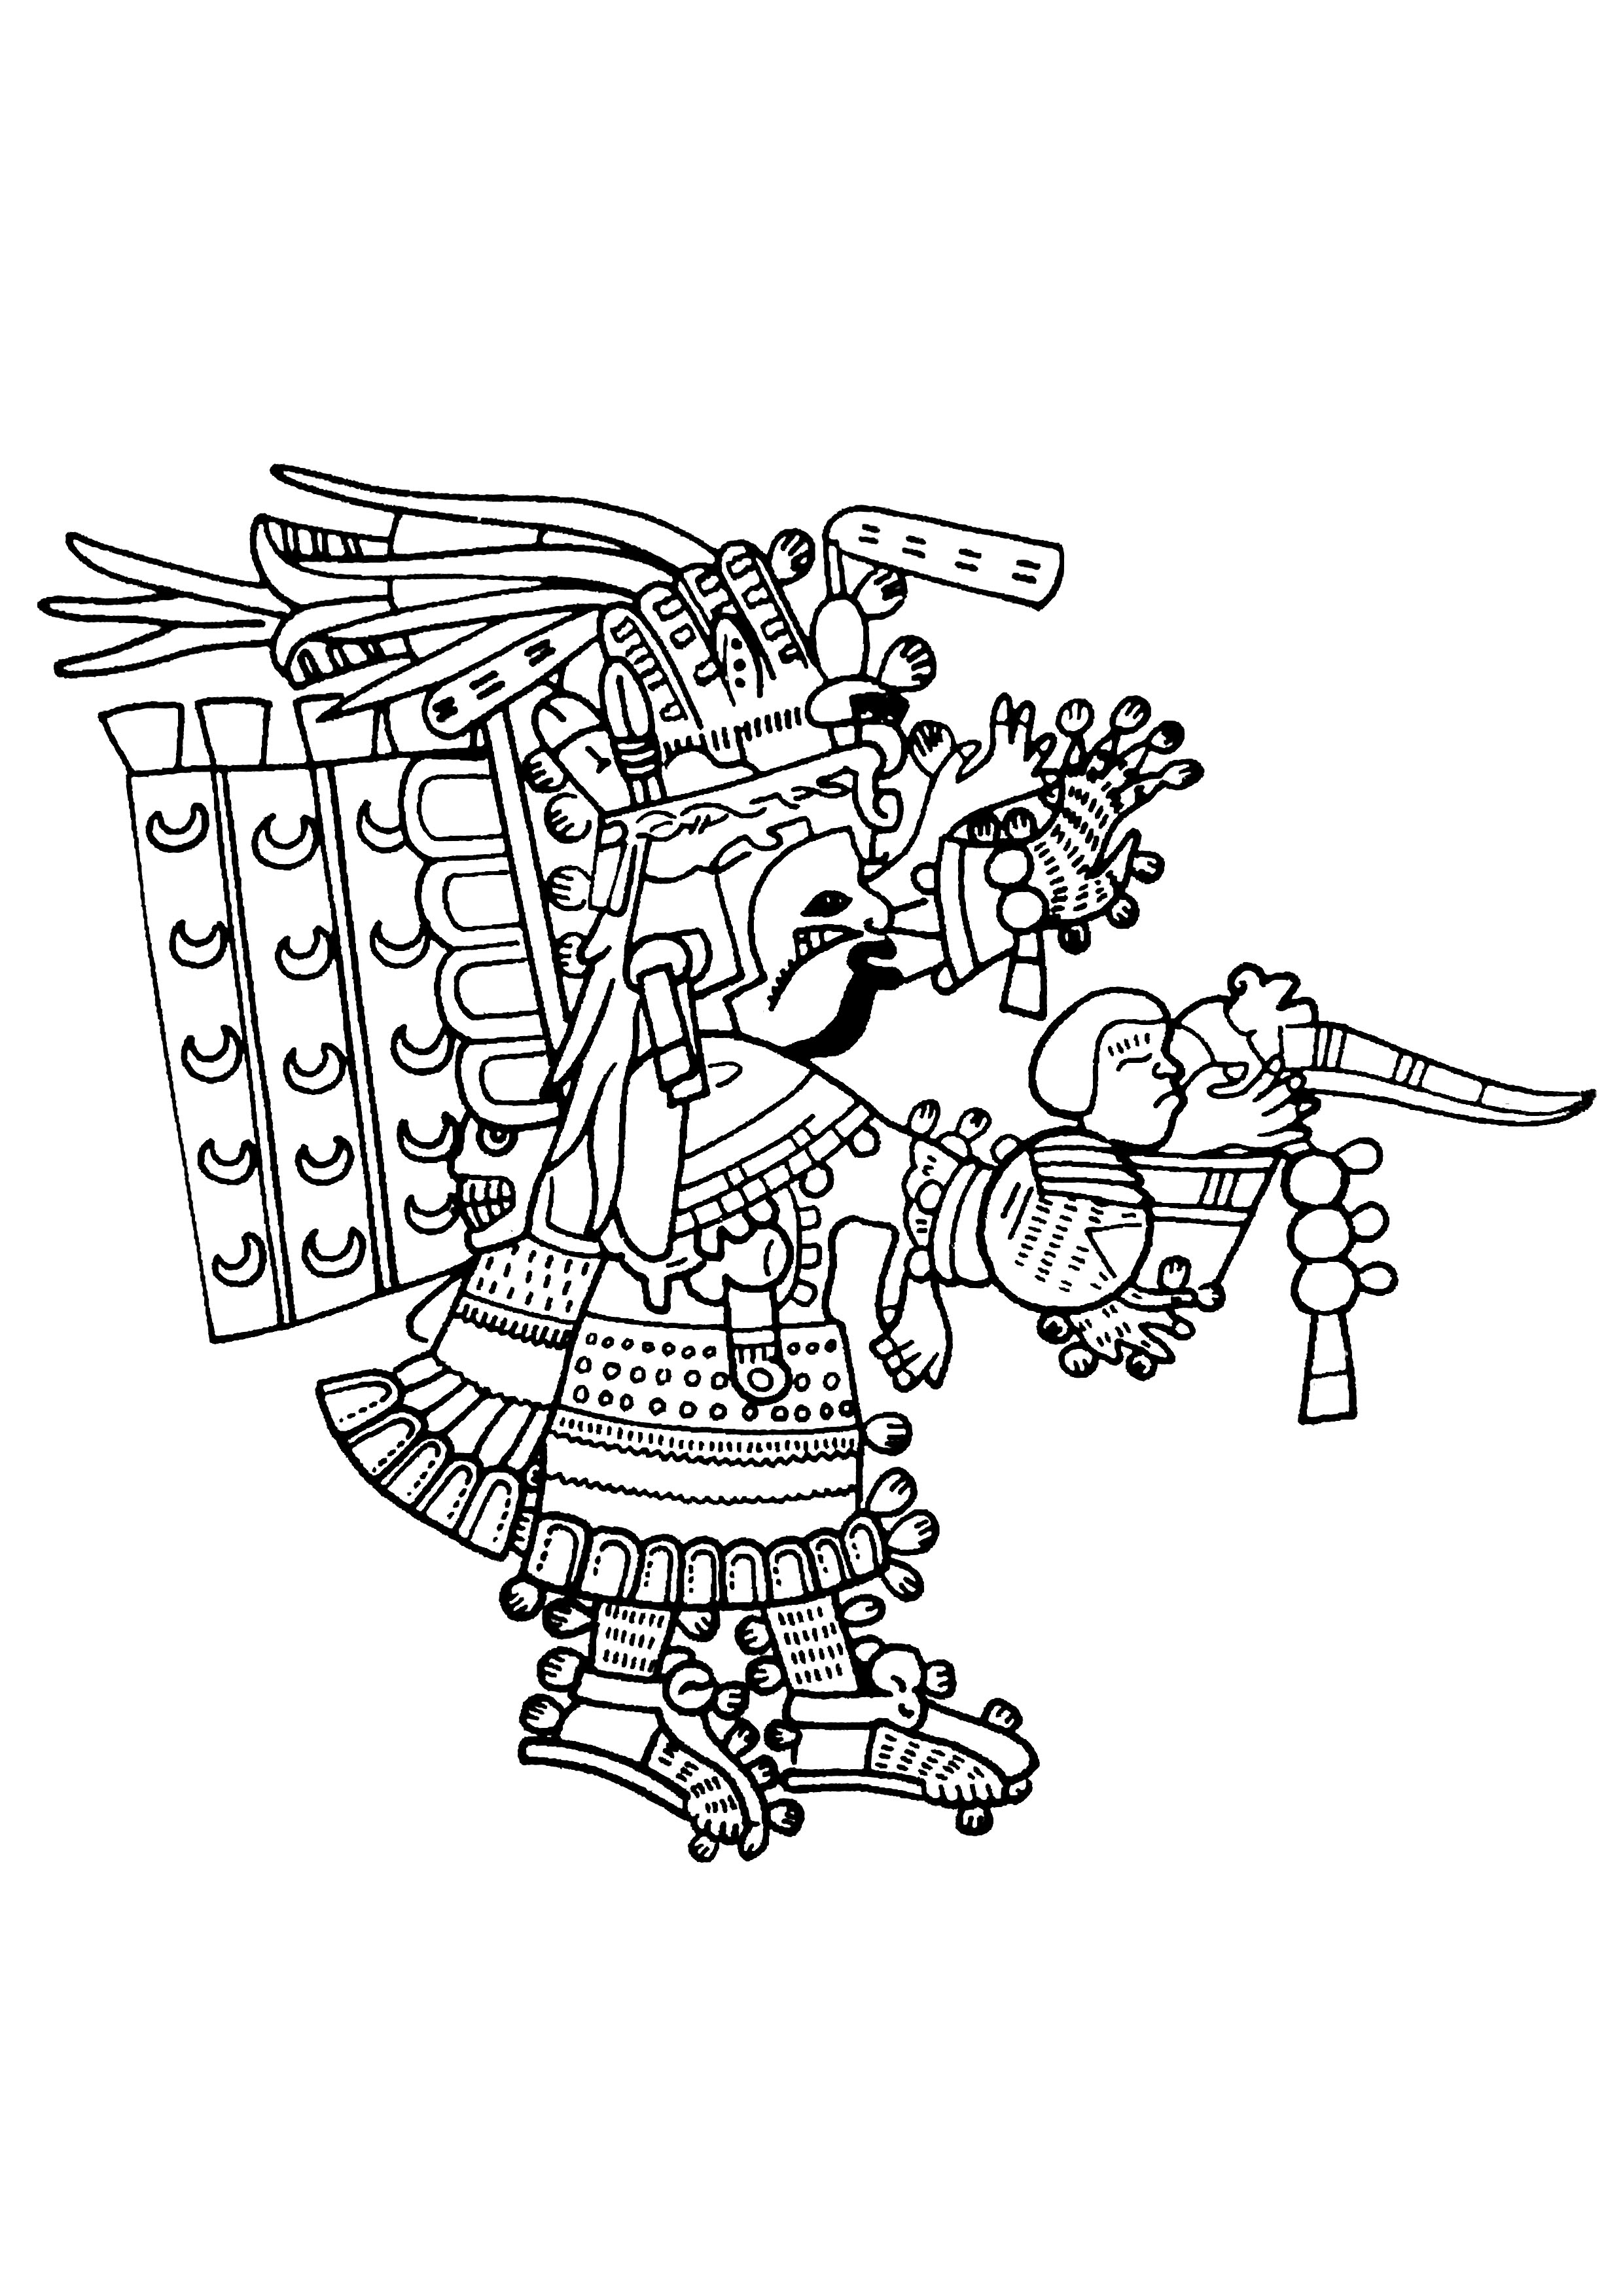 Coloring page created from Maya panel (Second half 8th century), visible at the British Museum (London).